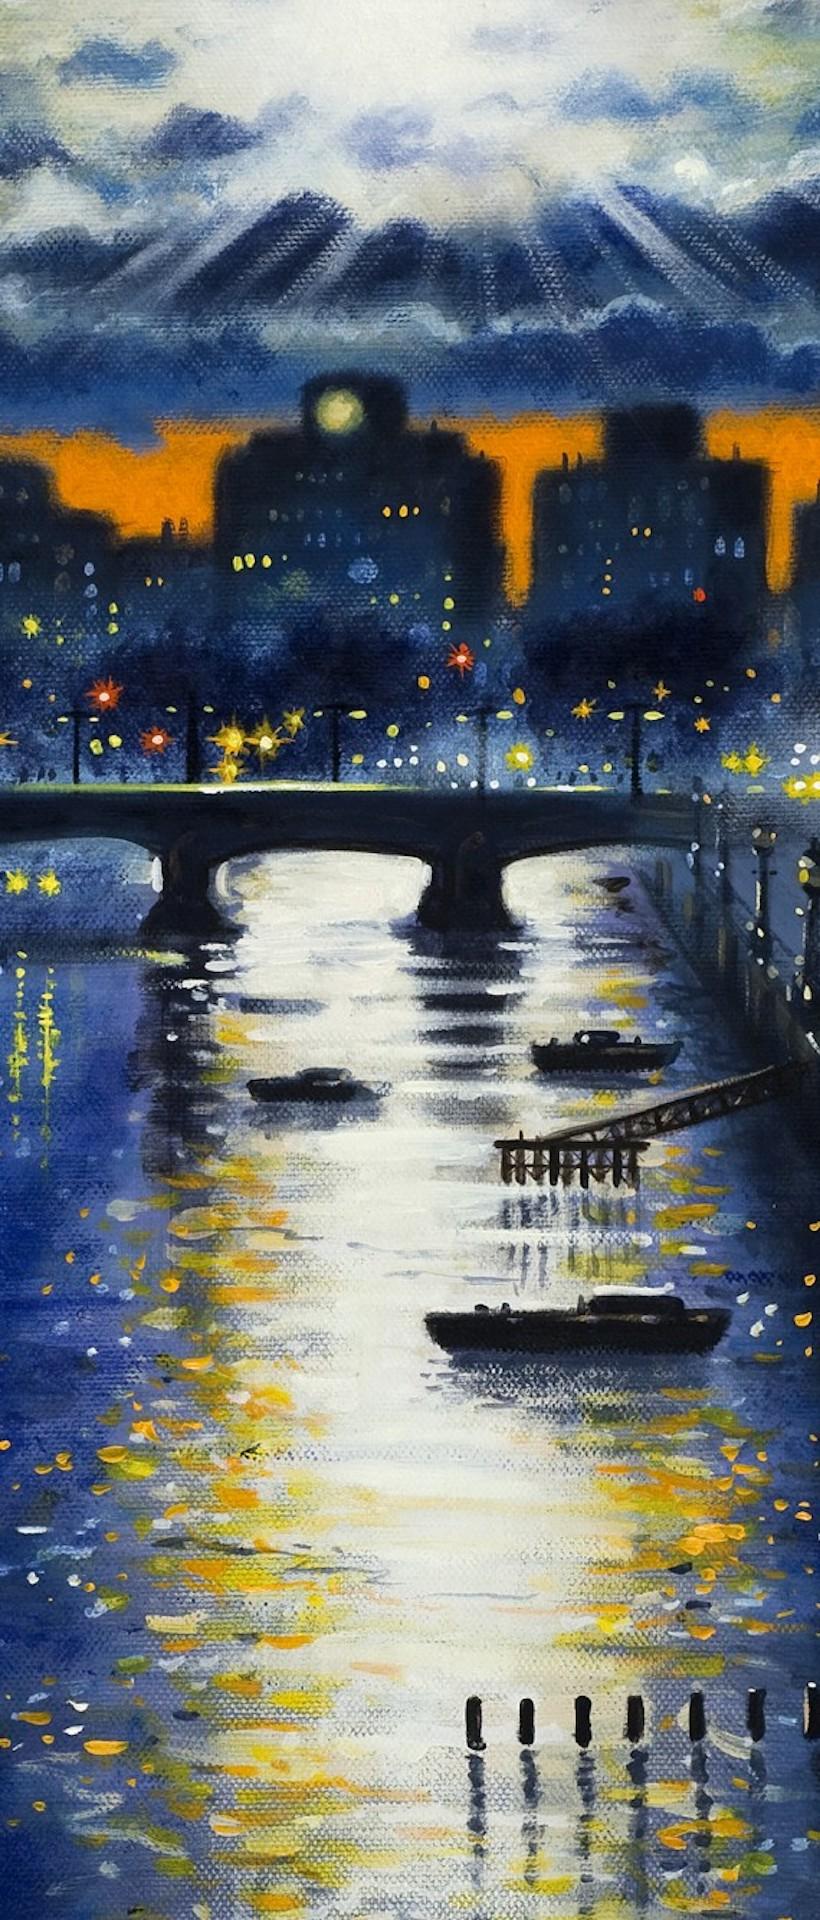 Thames Dusk (Waterloo Bridge from Blackfriars Bridge) [2013]
Original
Landscape
Oil Paint on Canvas
Canvas Size: H:51 cm x W:41 cm x D:4cm
Sold Unframed
Please note that insitu images are purely an indication of how a piece may look

Thames Dusk